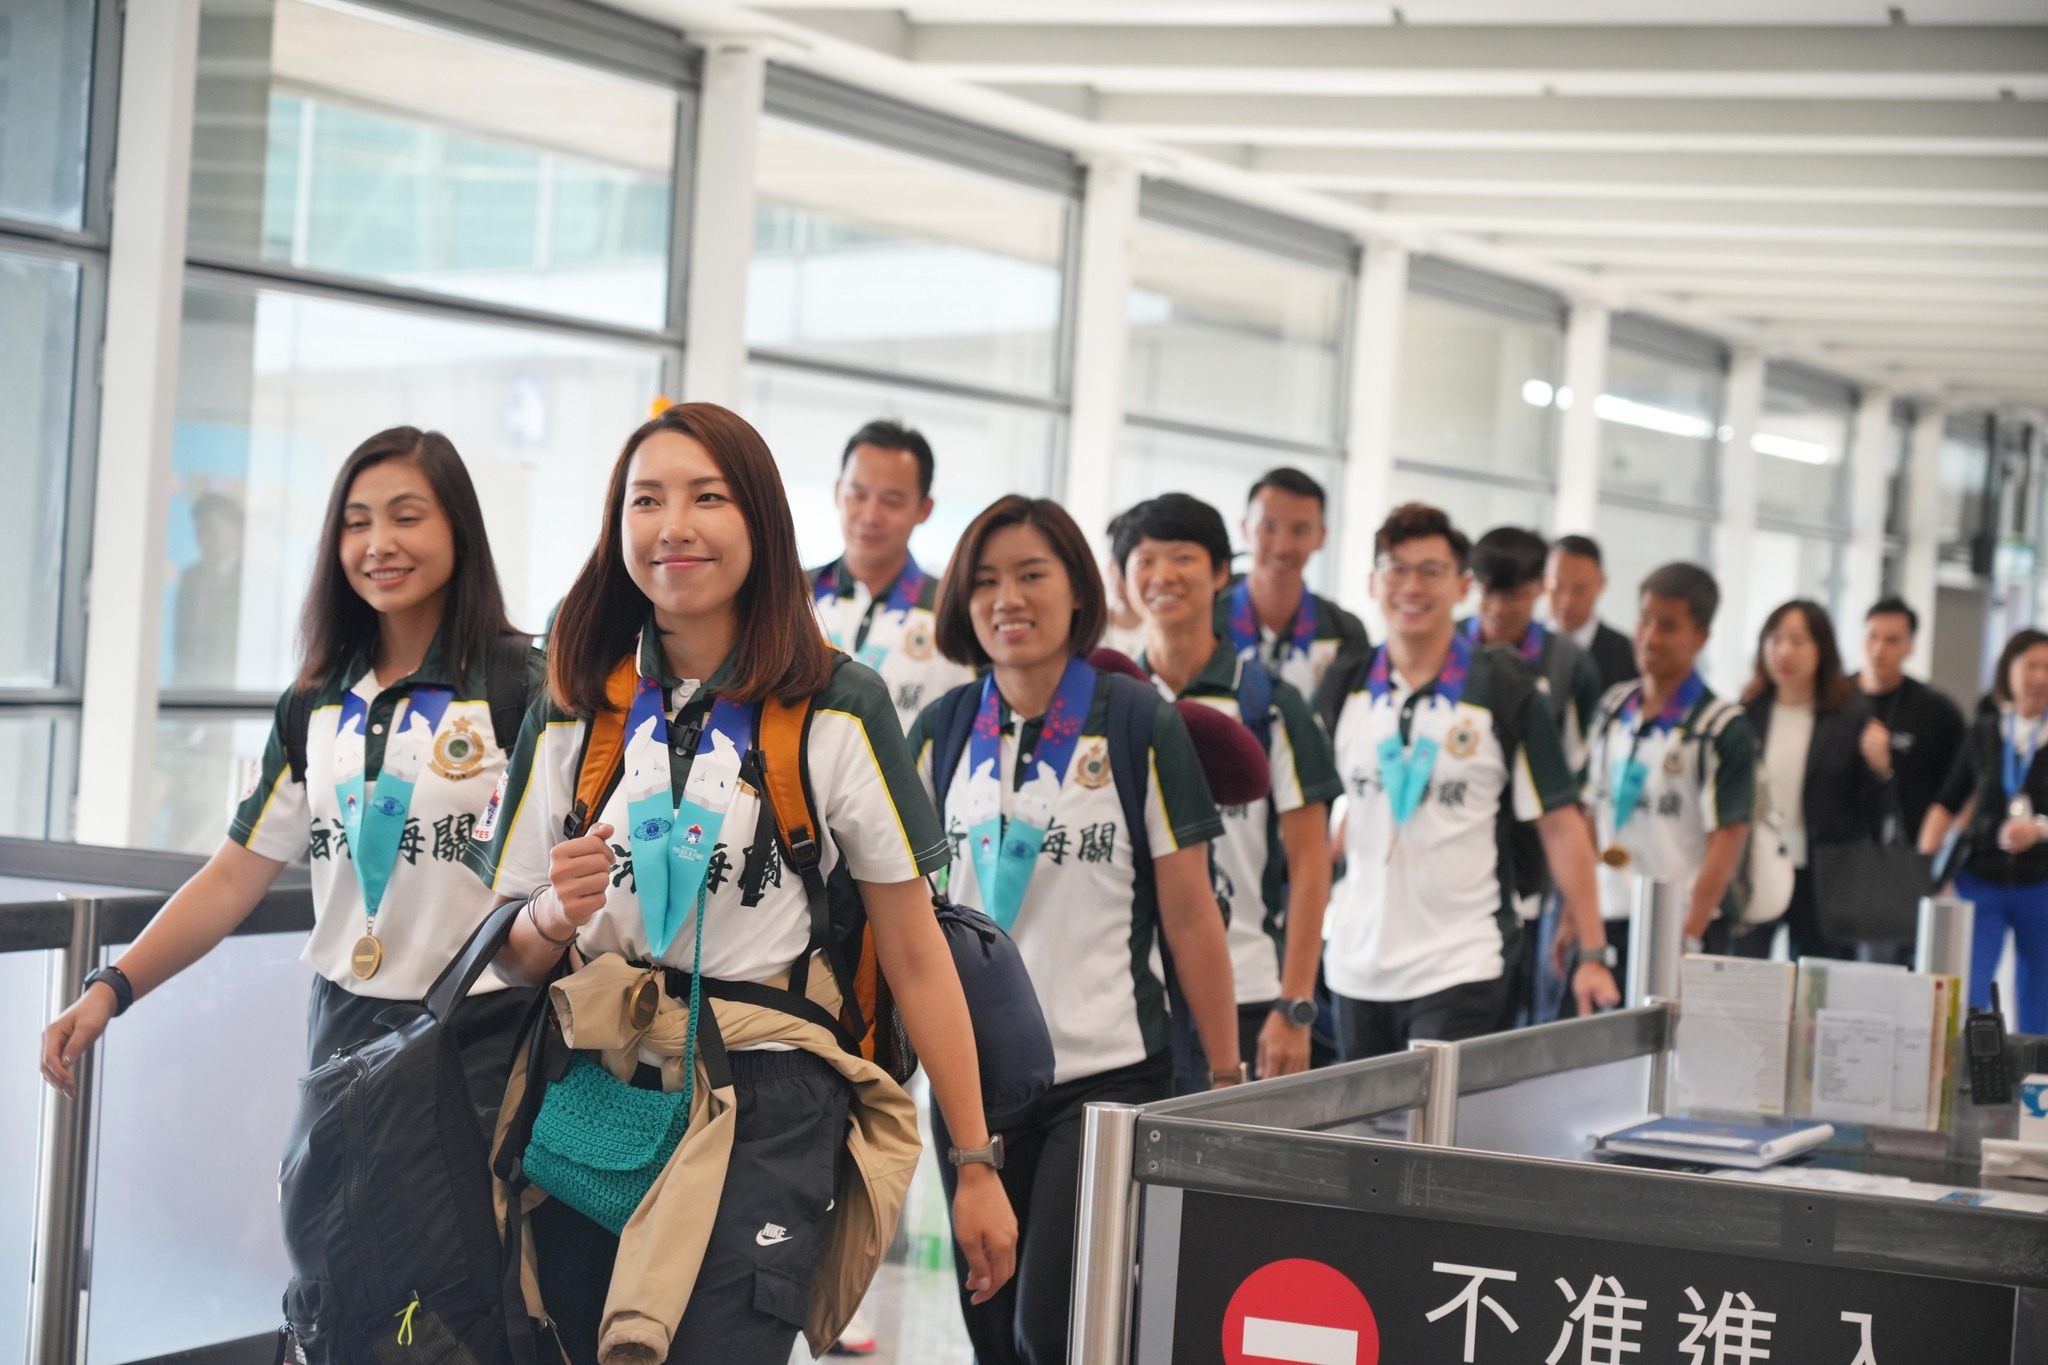 Hong Kong disciplined services athletes, who netted a record haul of medals at the World Police and Fire Games, return to the city on Tuesday. Photo: Facebook / Security Bureau